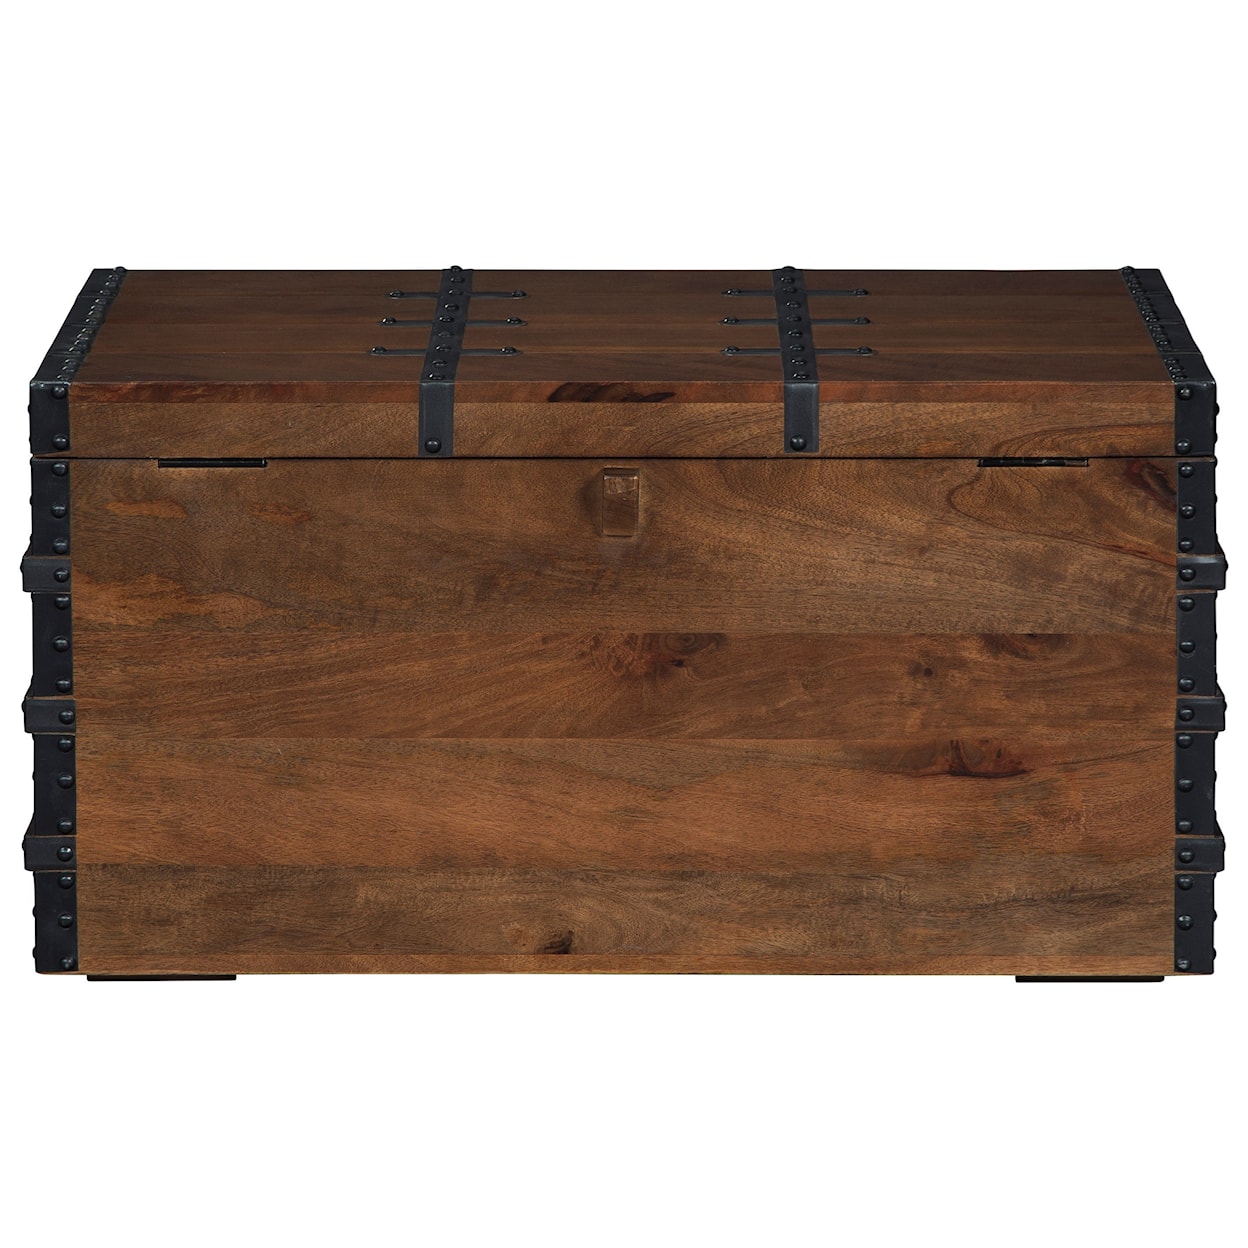 Signature Design by Ashley Kingsby Storage Trunk